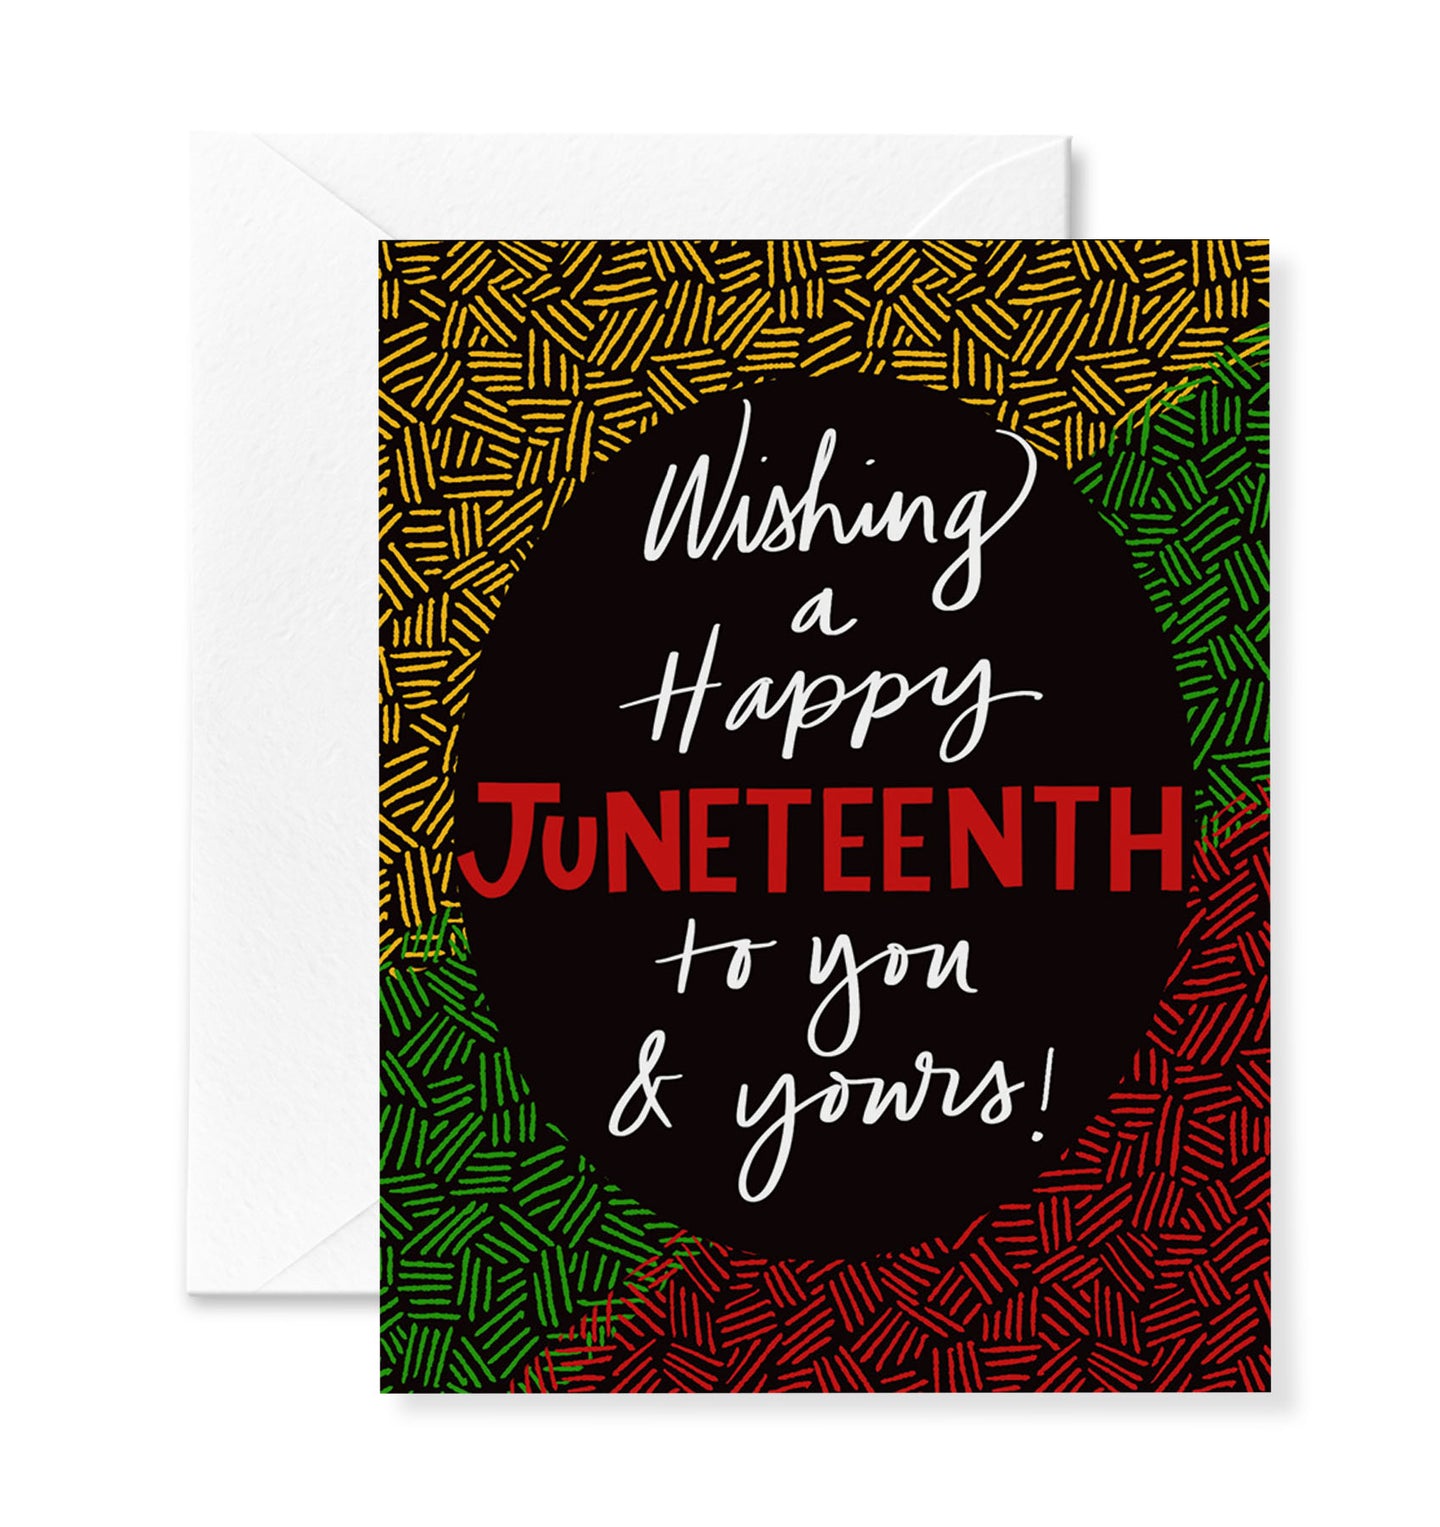 Juneteenth Wishes Card